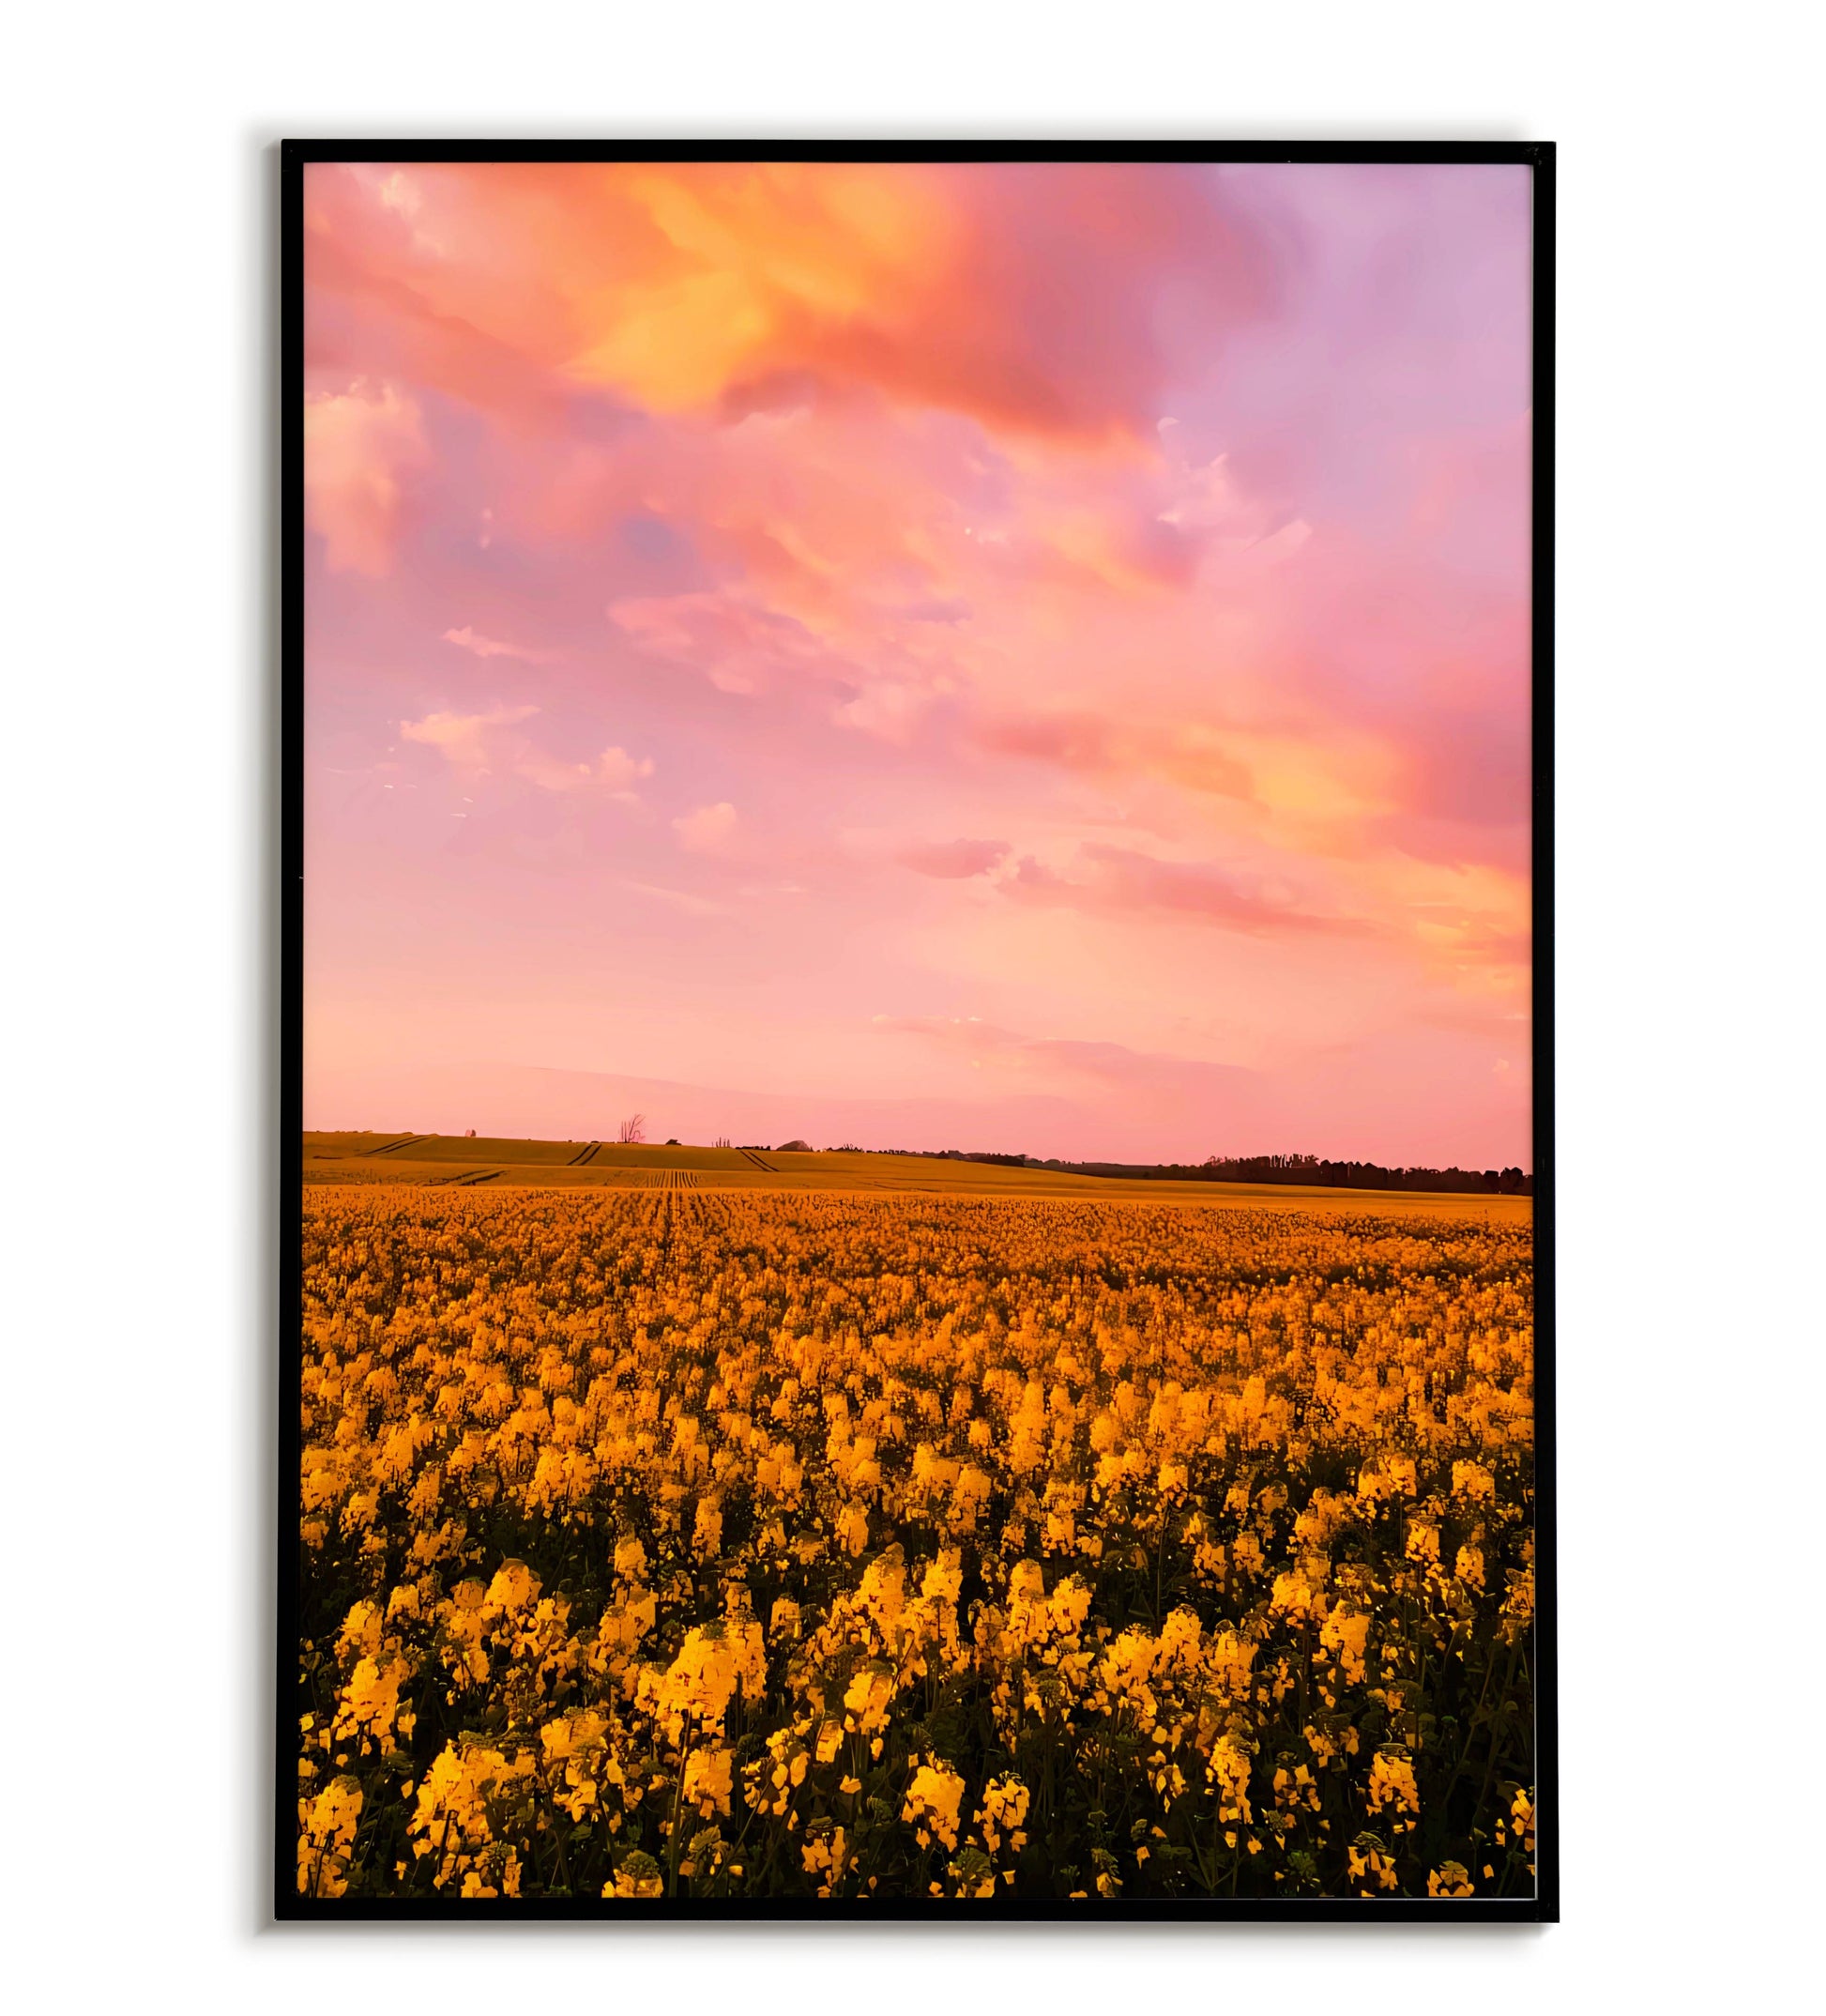 Flower Fields printable poster. Available for purchase as a physical poster or digital download.